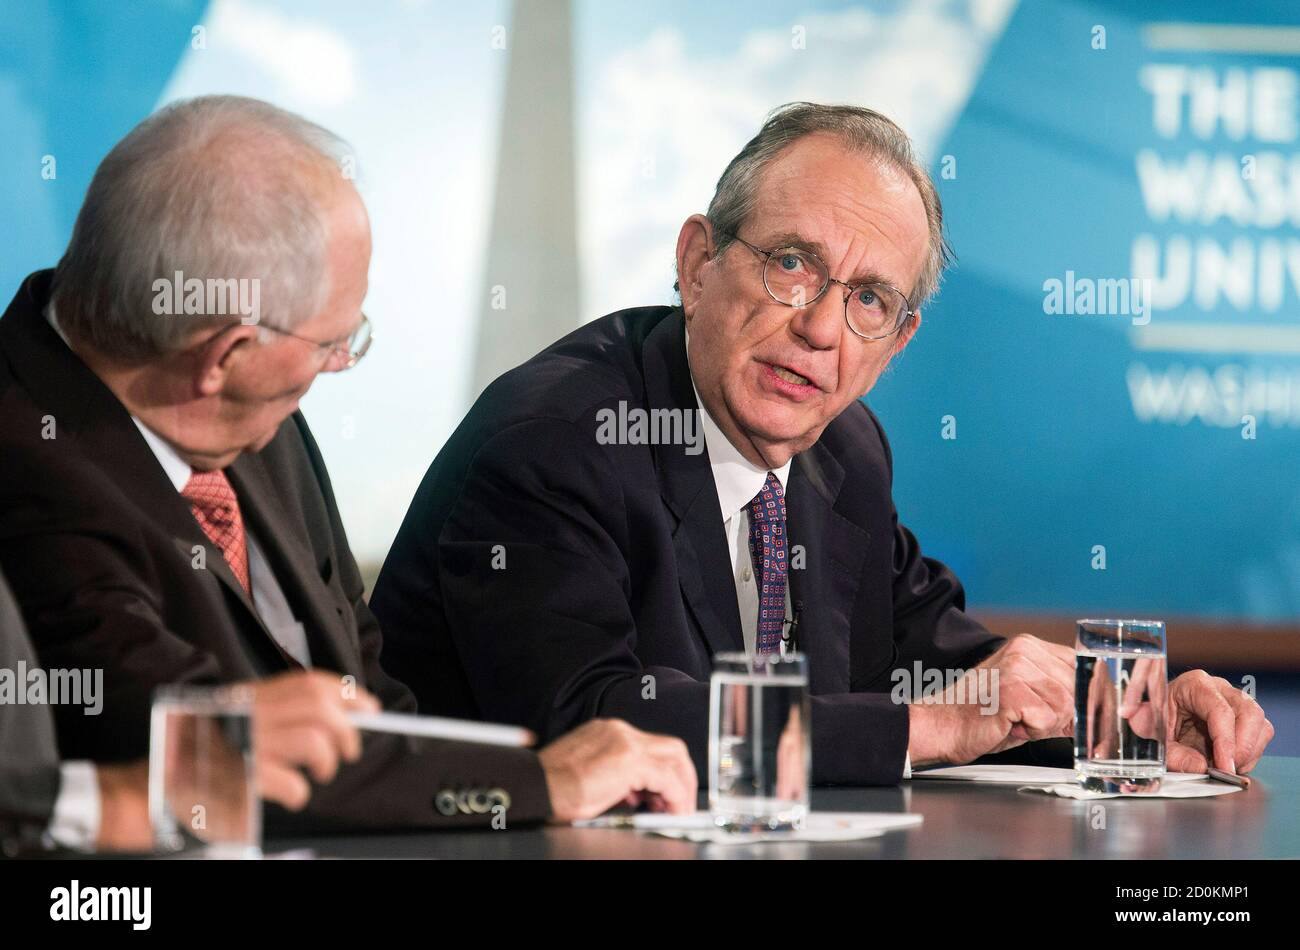 Italy's Minister of Economy and Finance Pier Carlo Padoan (R) speaks during a discussion on 'A Reform Agenda for Europe's Leaders' during the World Bank/IMF annual meetings in Washington October 9, 2014.      REUTERS/Joshua Roberts    (UNITED STATES - Tags: POLITICS BUSINESS) Stock Photo